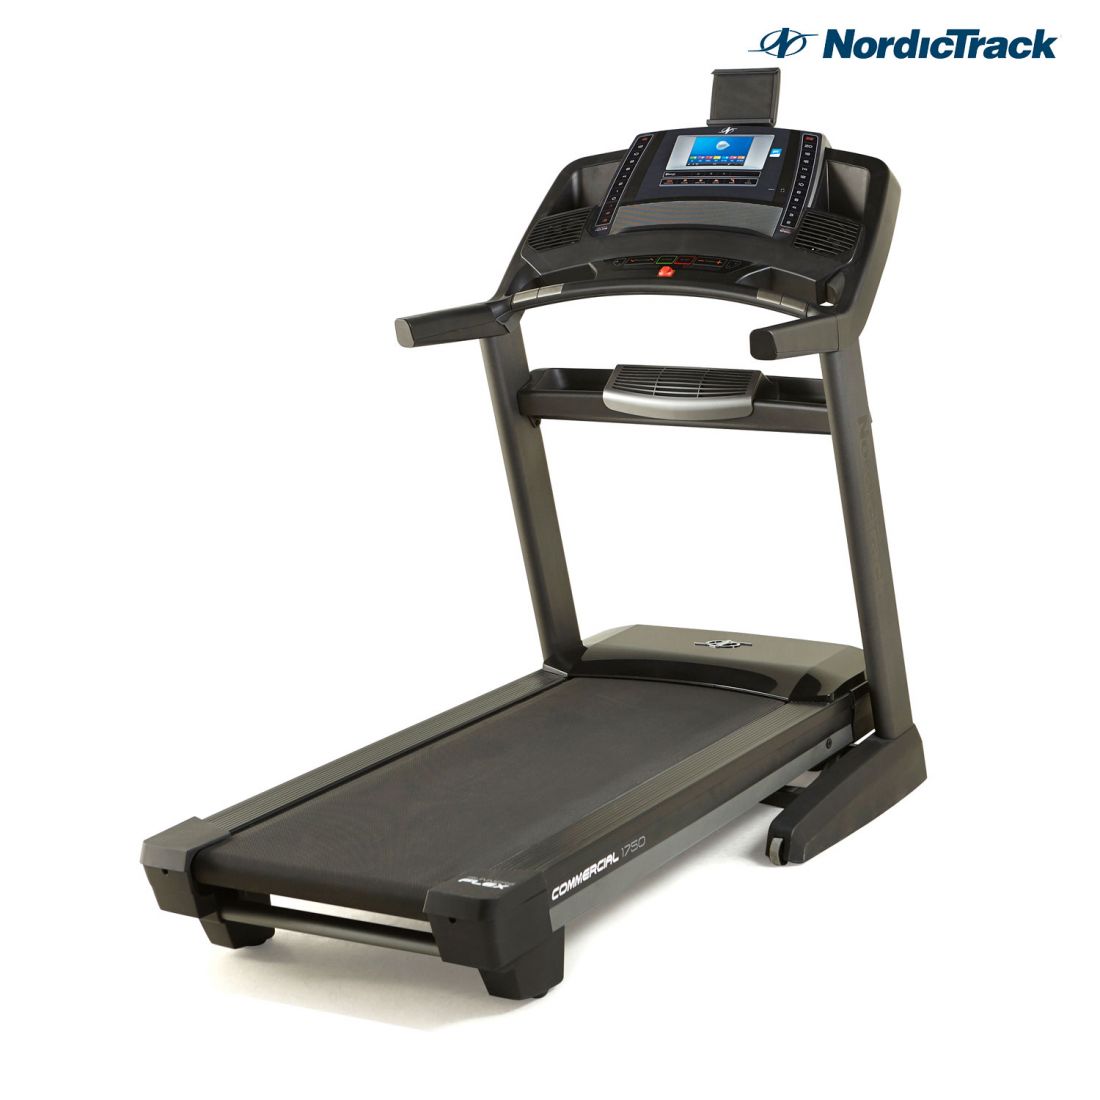 NordicTrack Commercial 1750